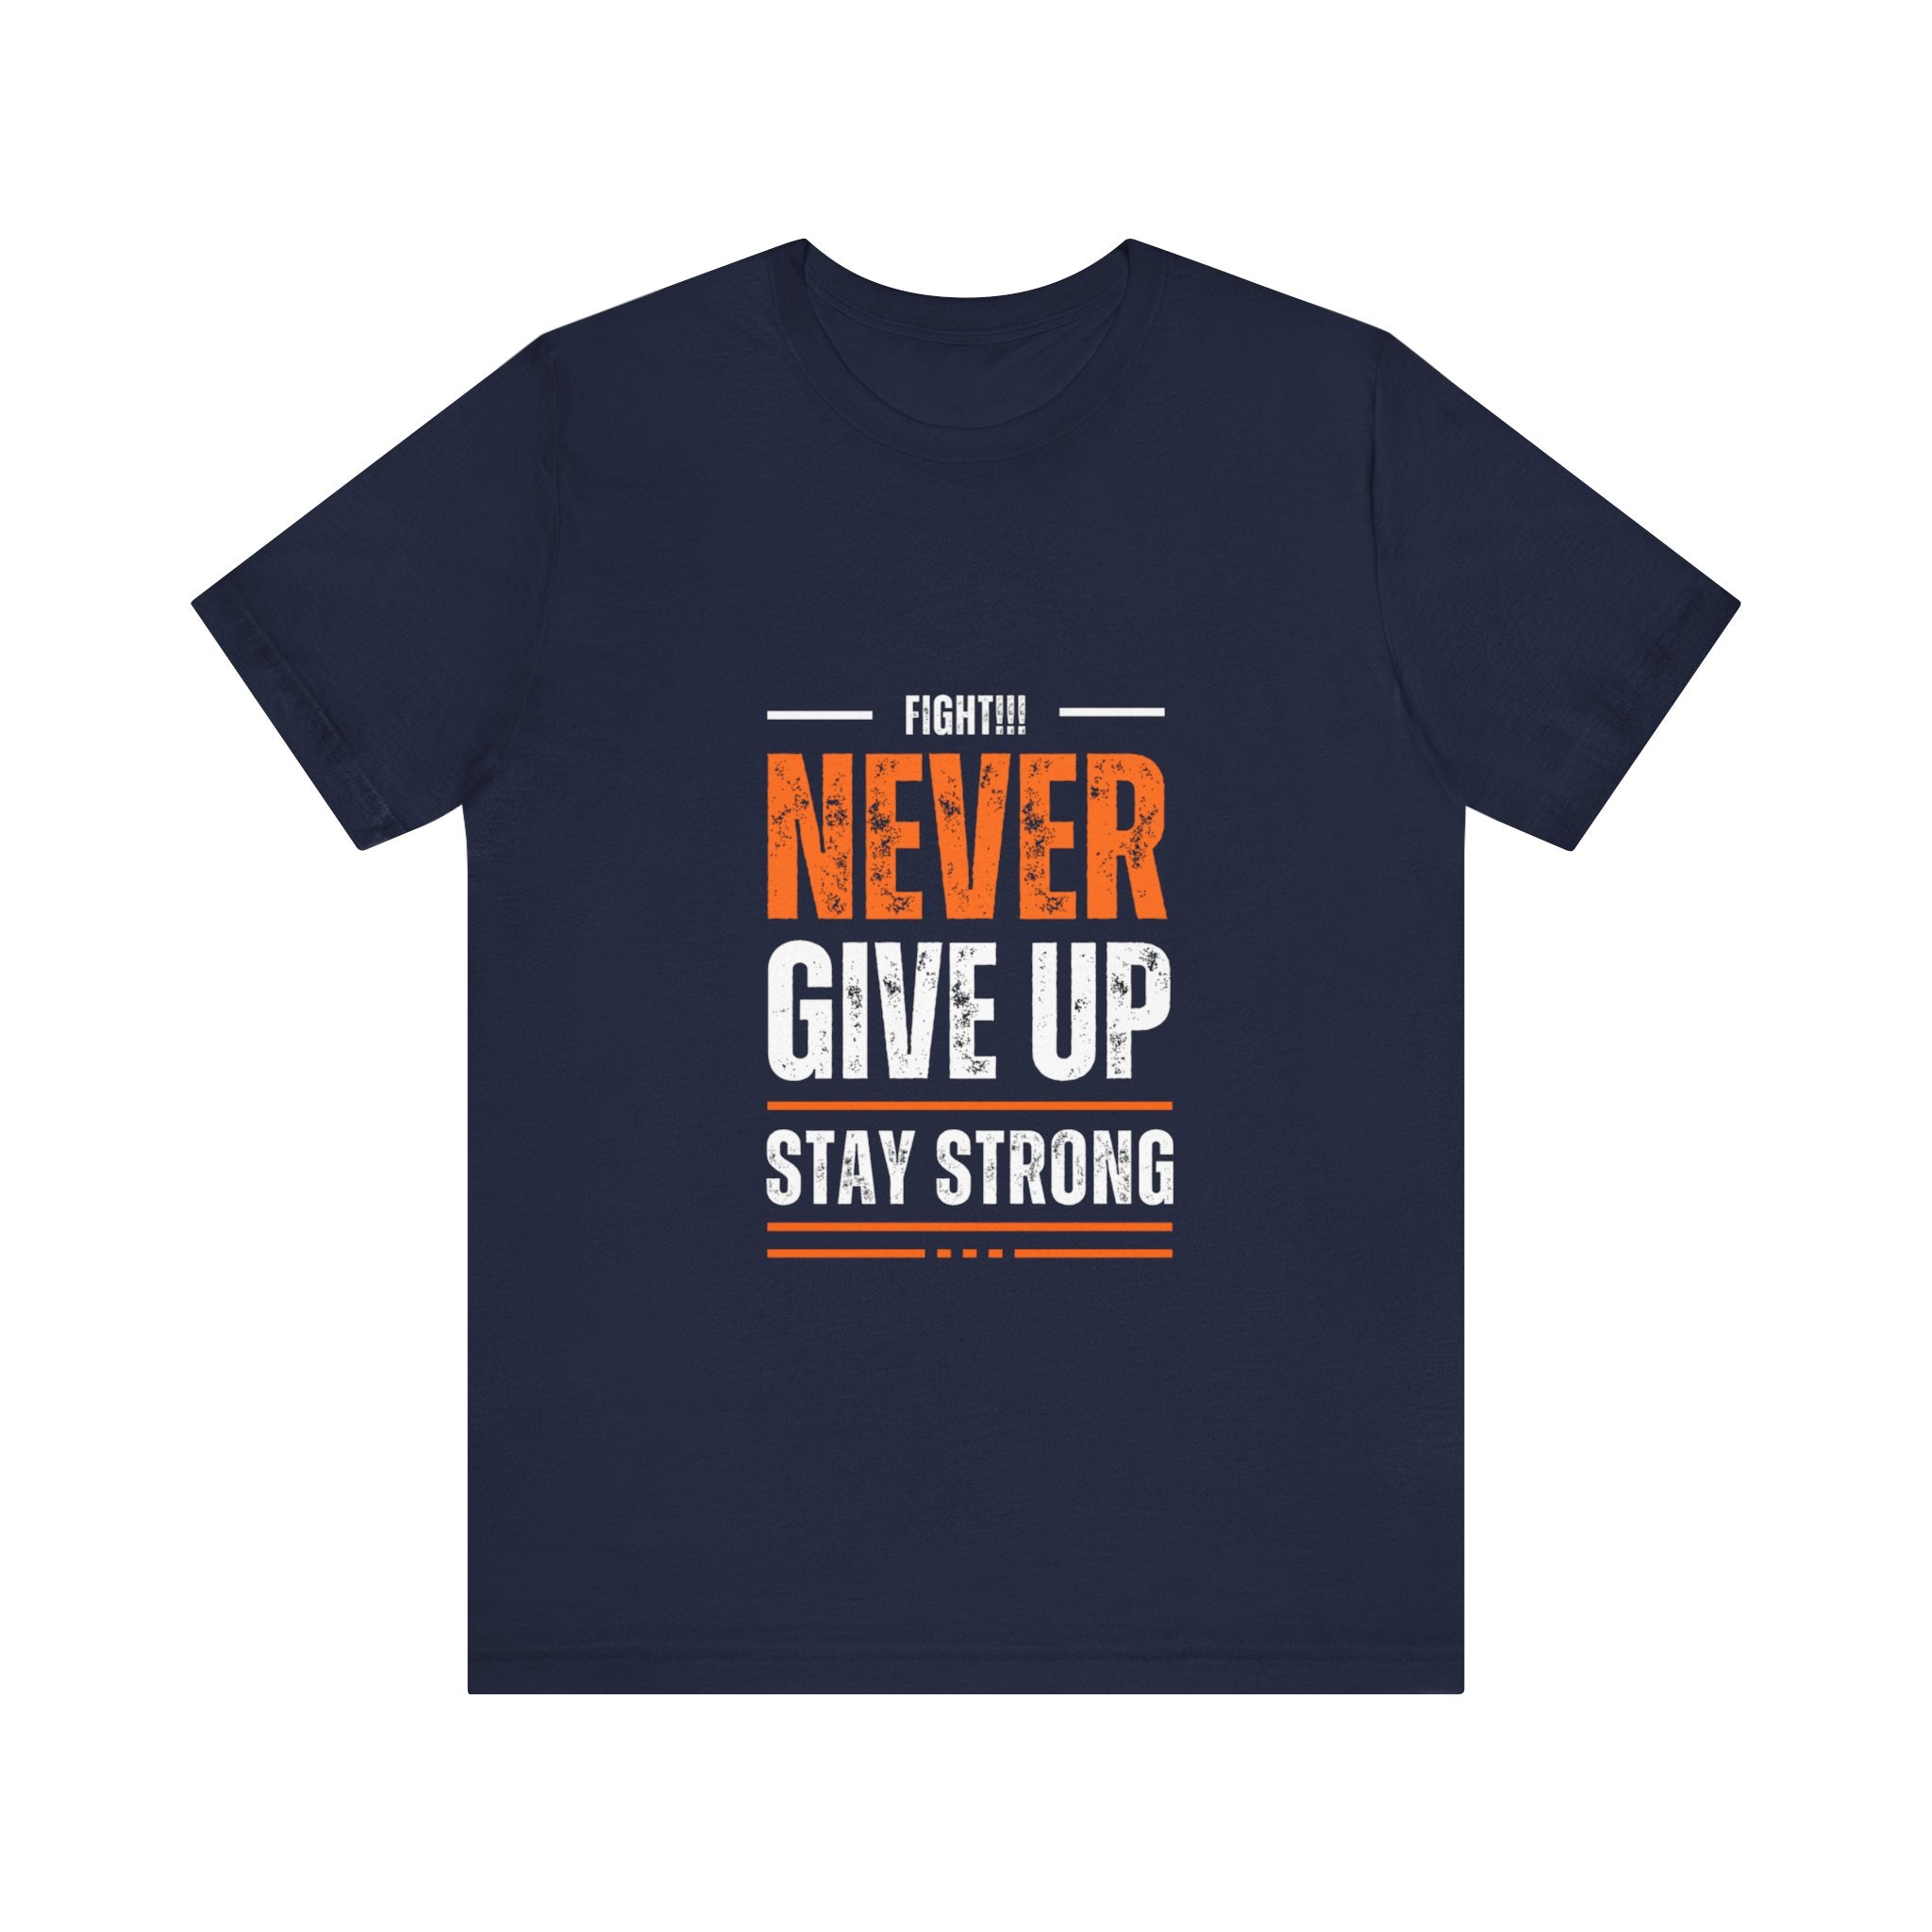 Never Give Up Unisex Jersey Tee, Women's Clothing, Men's Crew Neck T-shirt, DTG Printed, Regular Fit